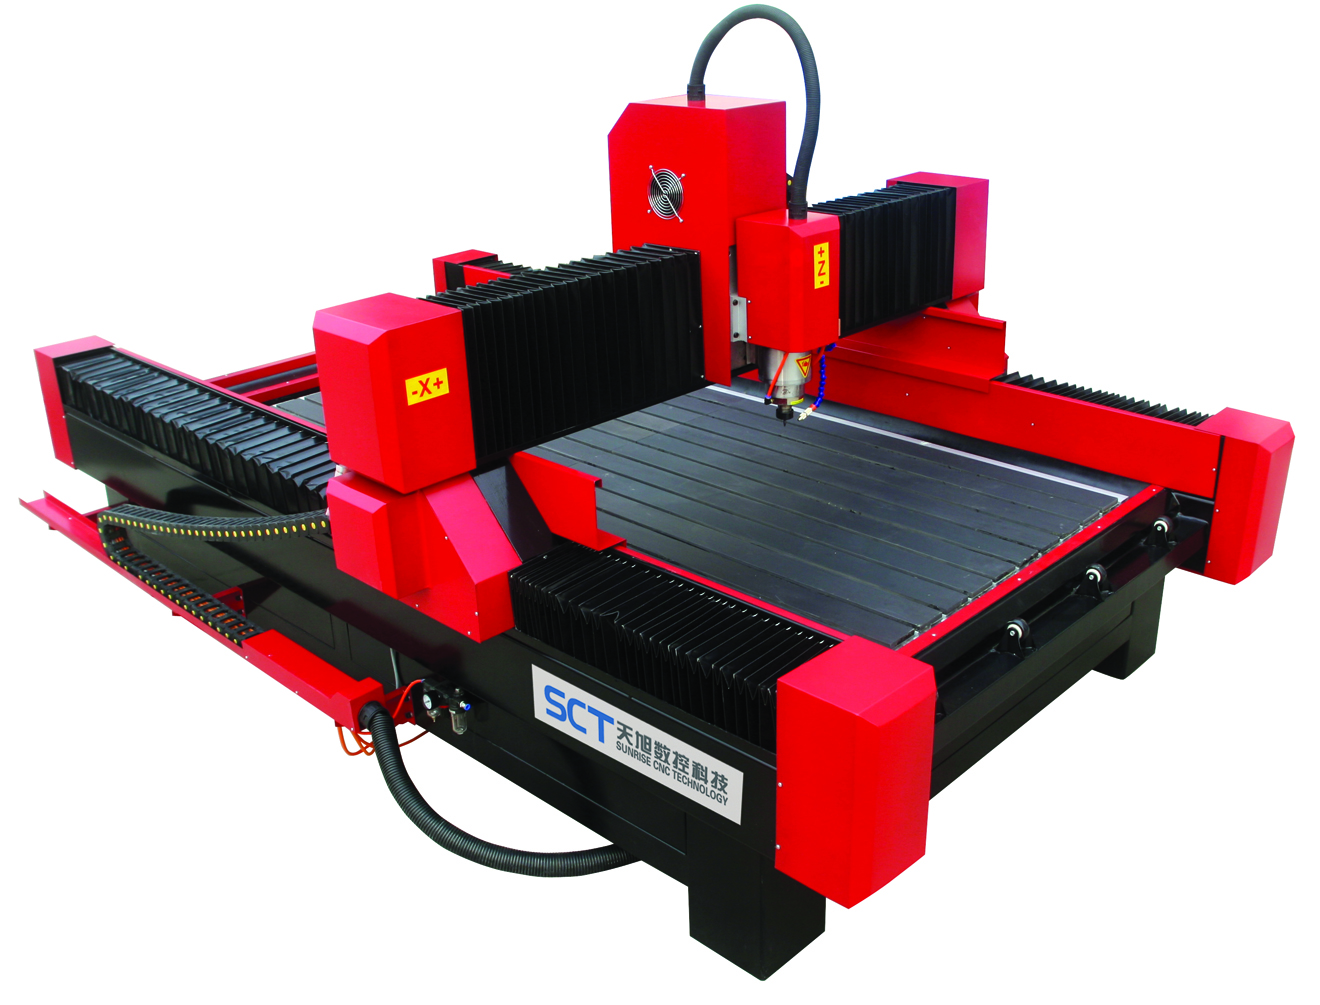 Heavy-Duty Frame Stone Carving Machines/Granite Engraving CNC Router with 5.5kw Spindle